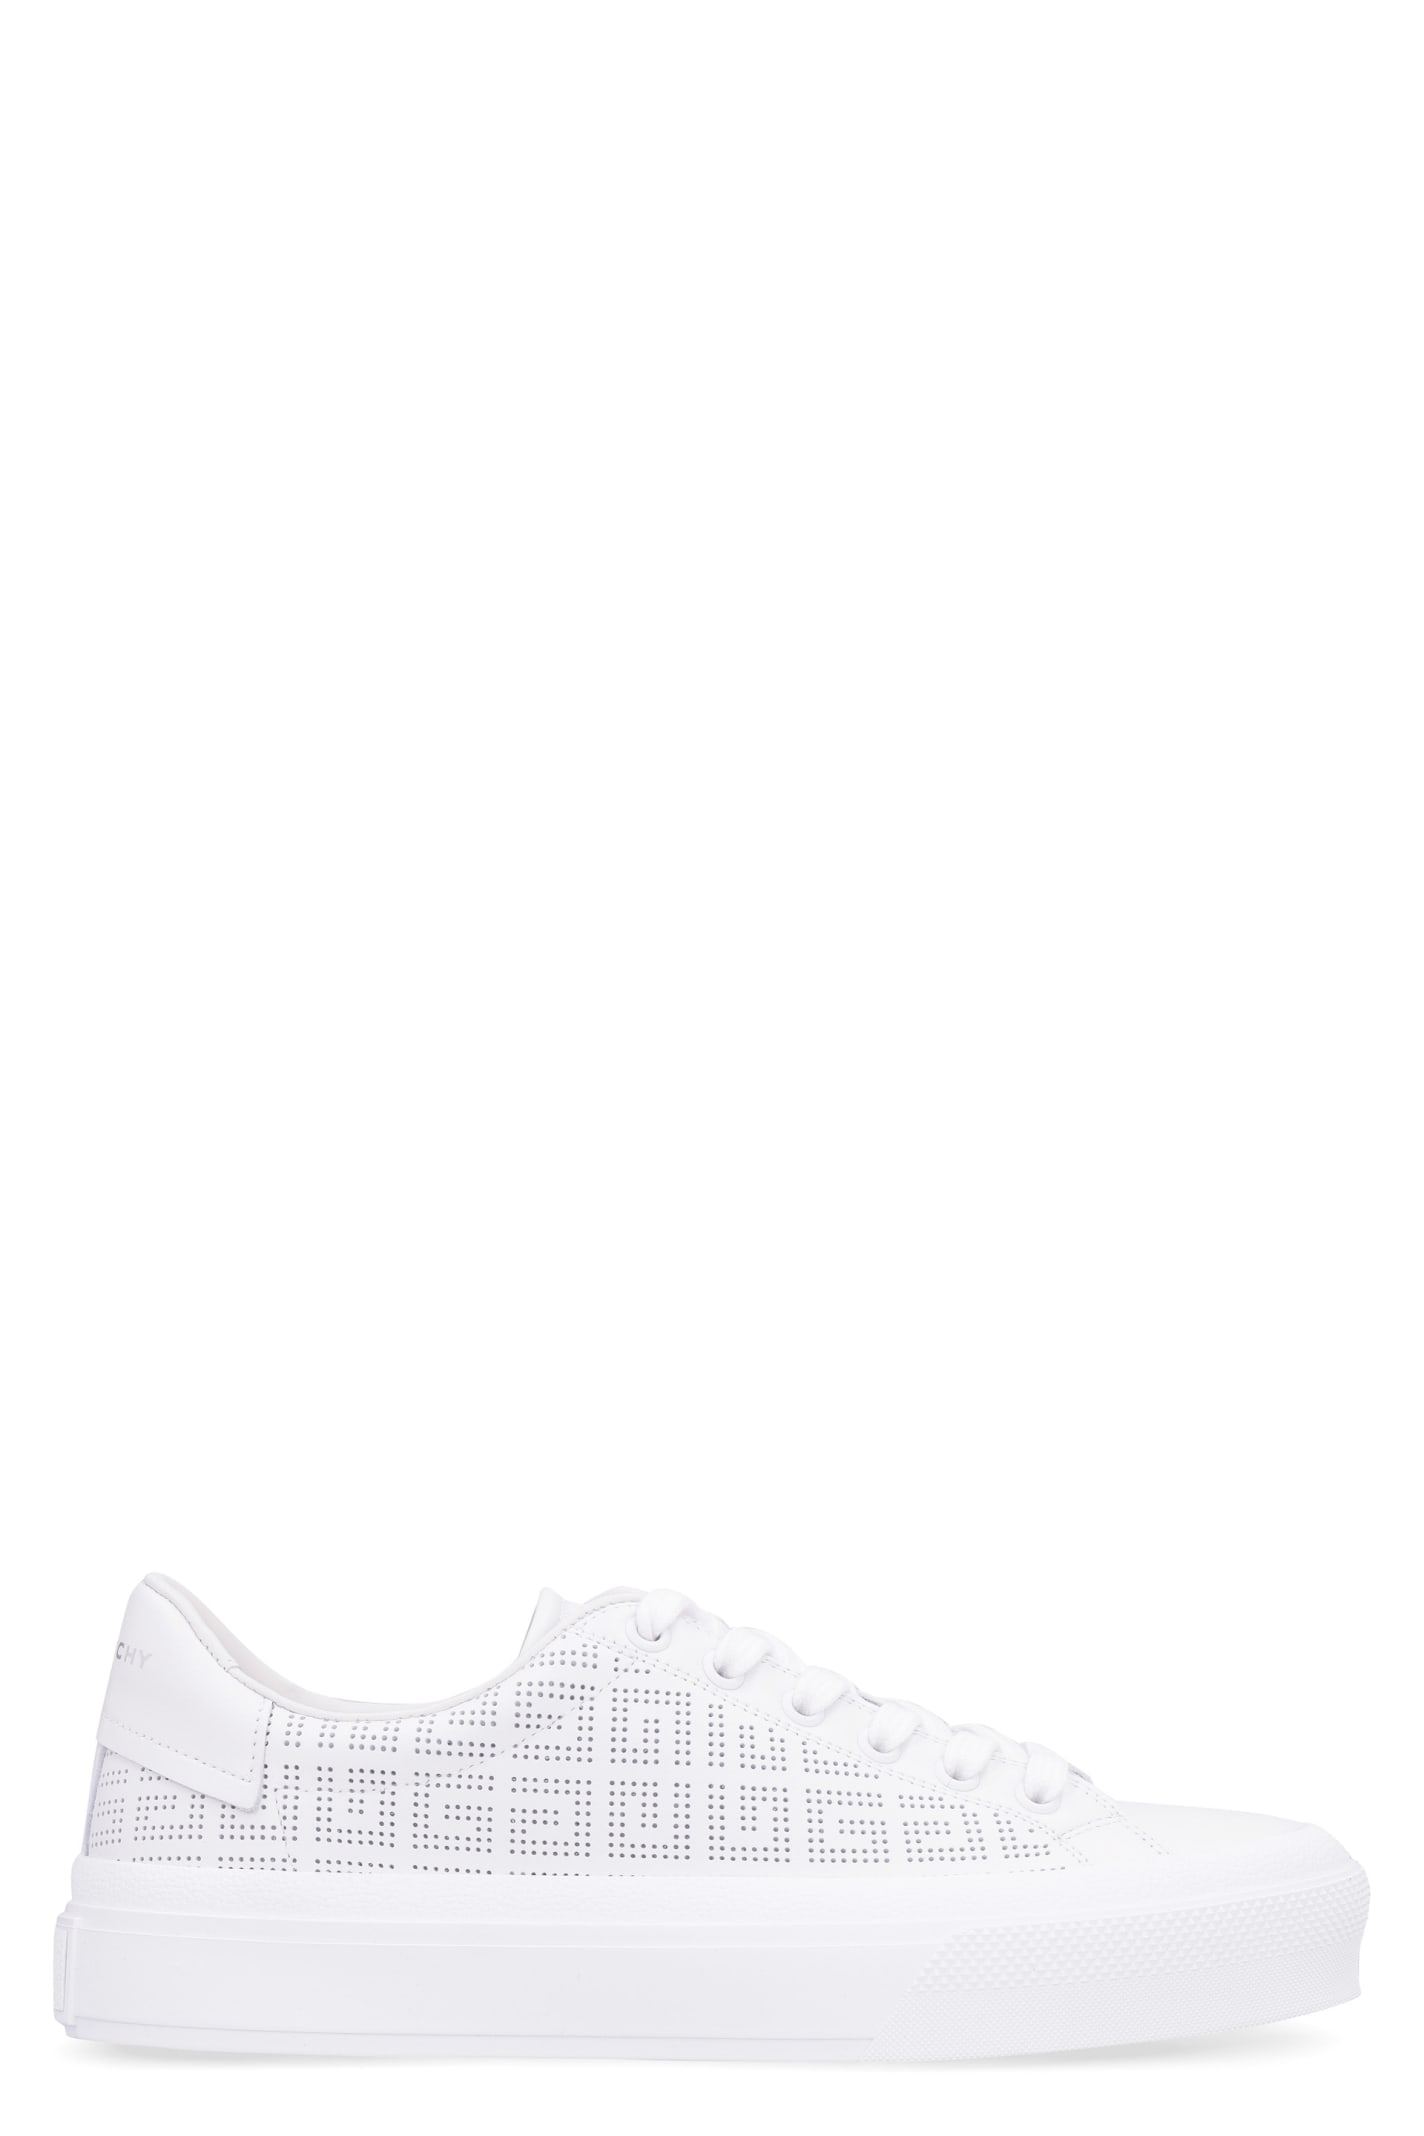 Givenchy City Sport Low-top Sneakers